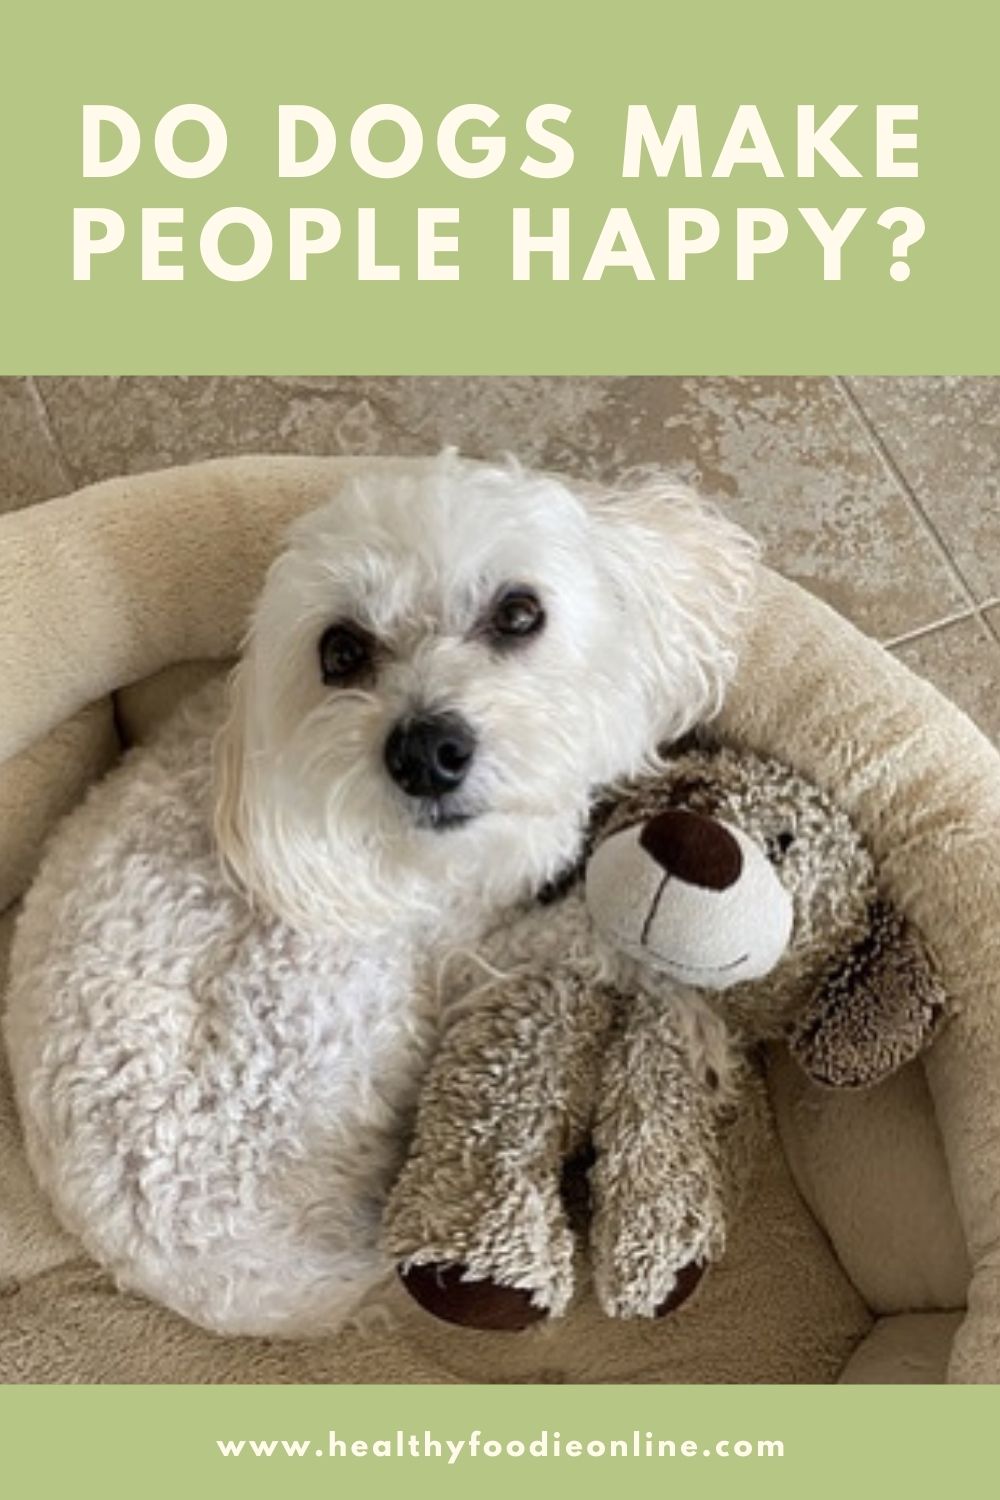 Do Dogs Make People Happy?